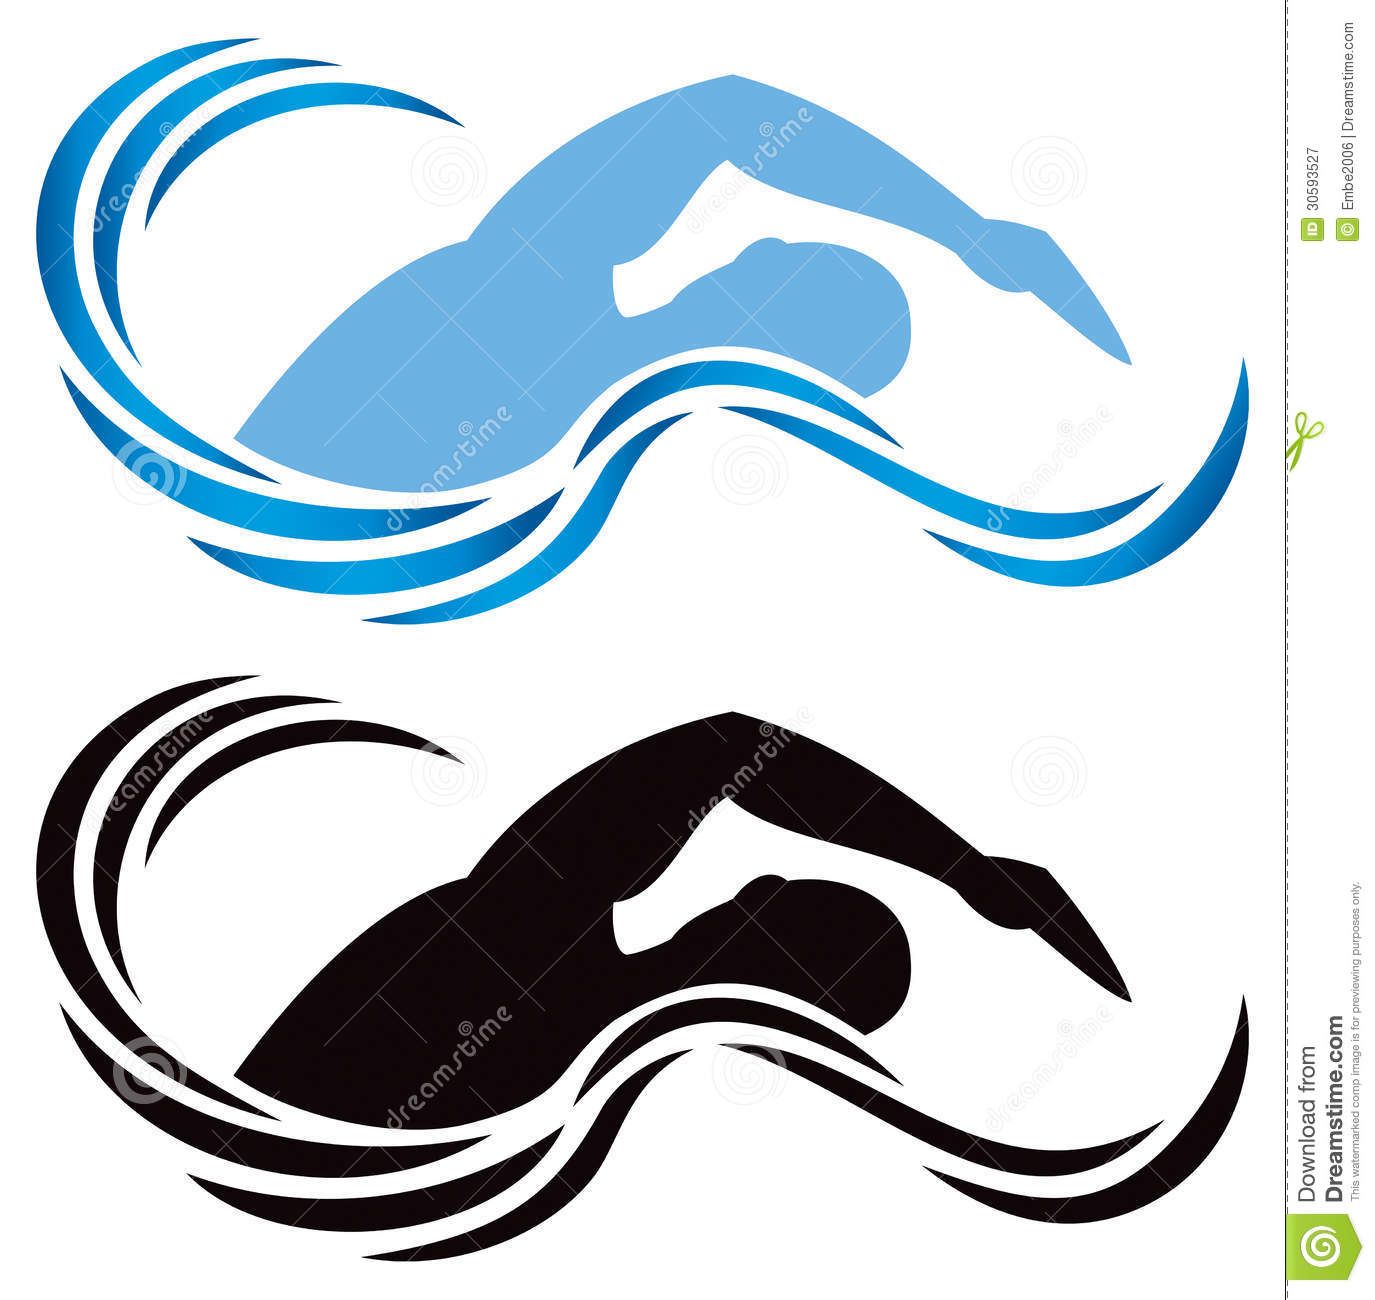 swimmer clipart side view